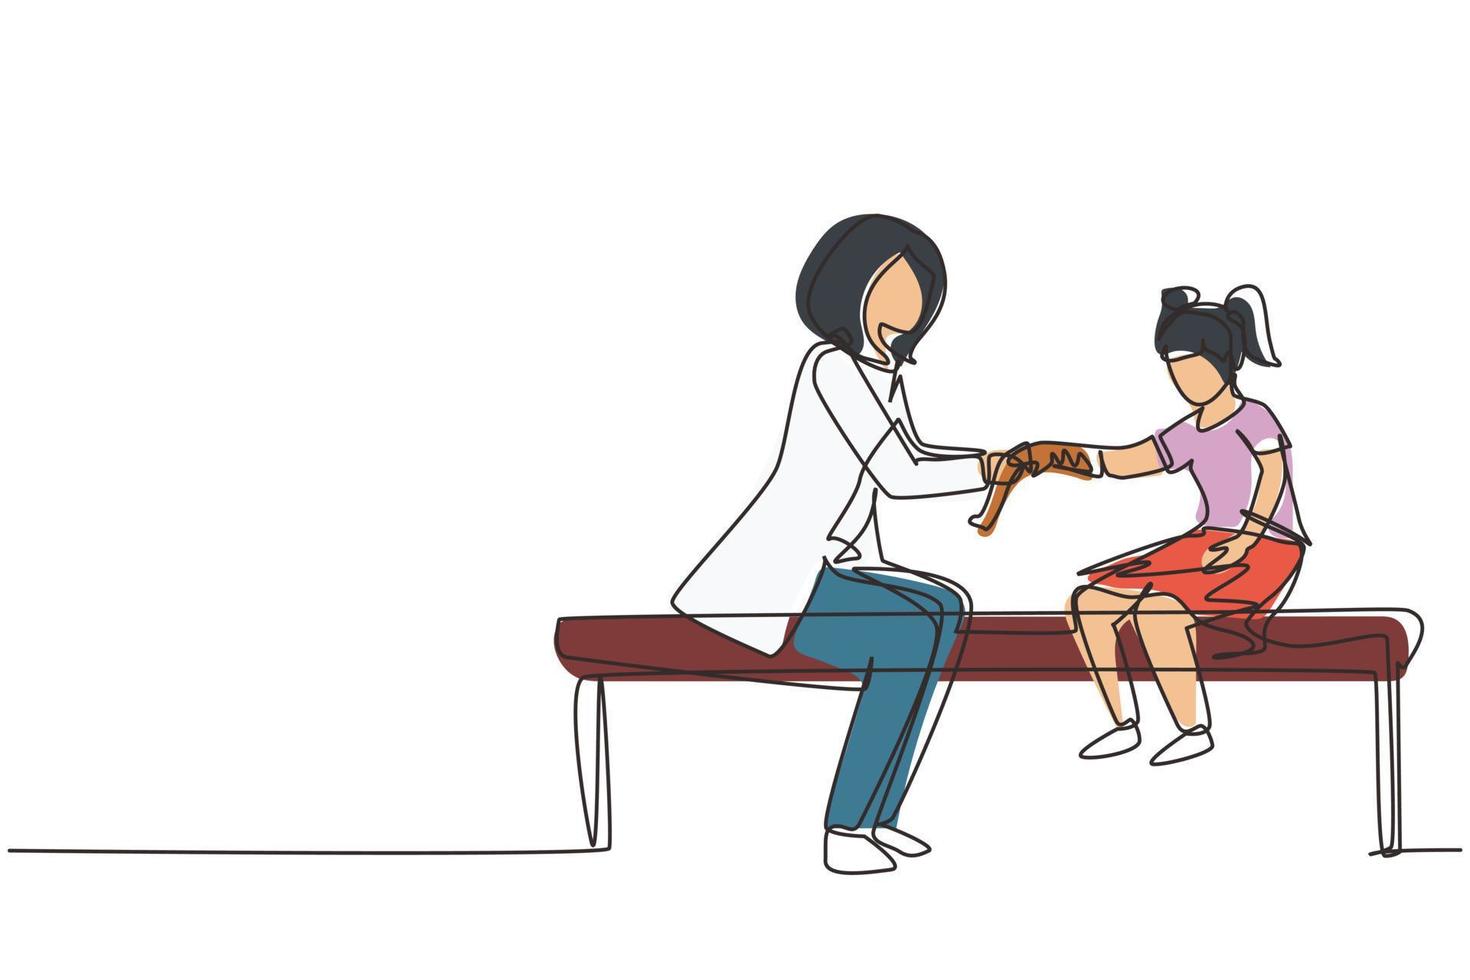 Single one line drawing little kid on consultation with orthopedic doctor. Children's doctor works with little girl. Orthopedist bandages girl's hand. Continuous line draw design vector illustration